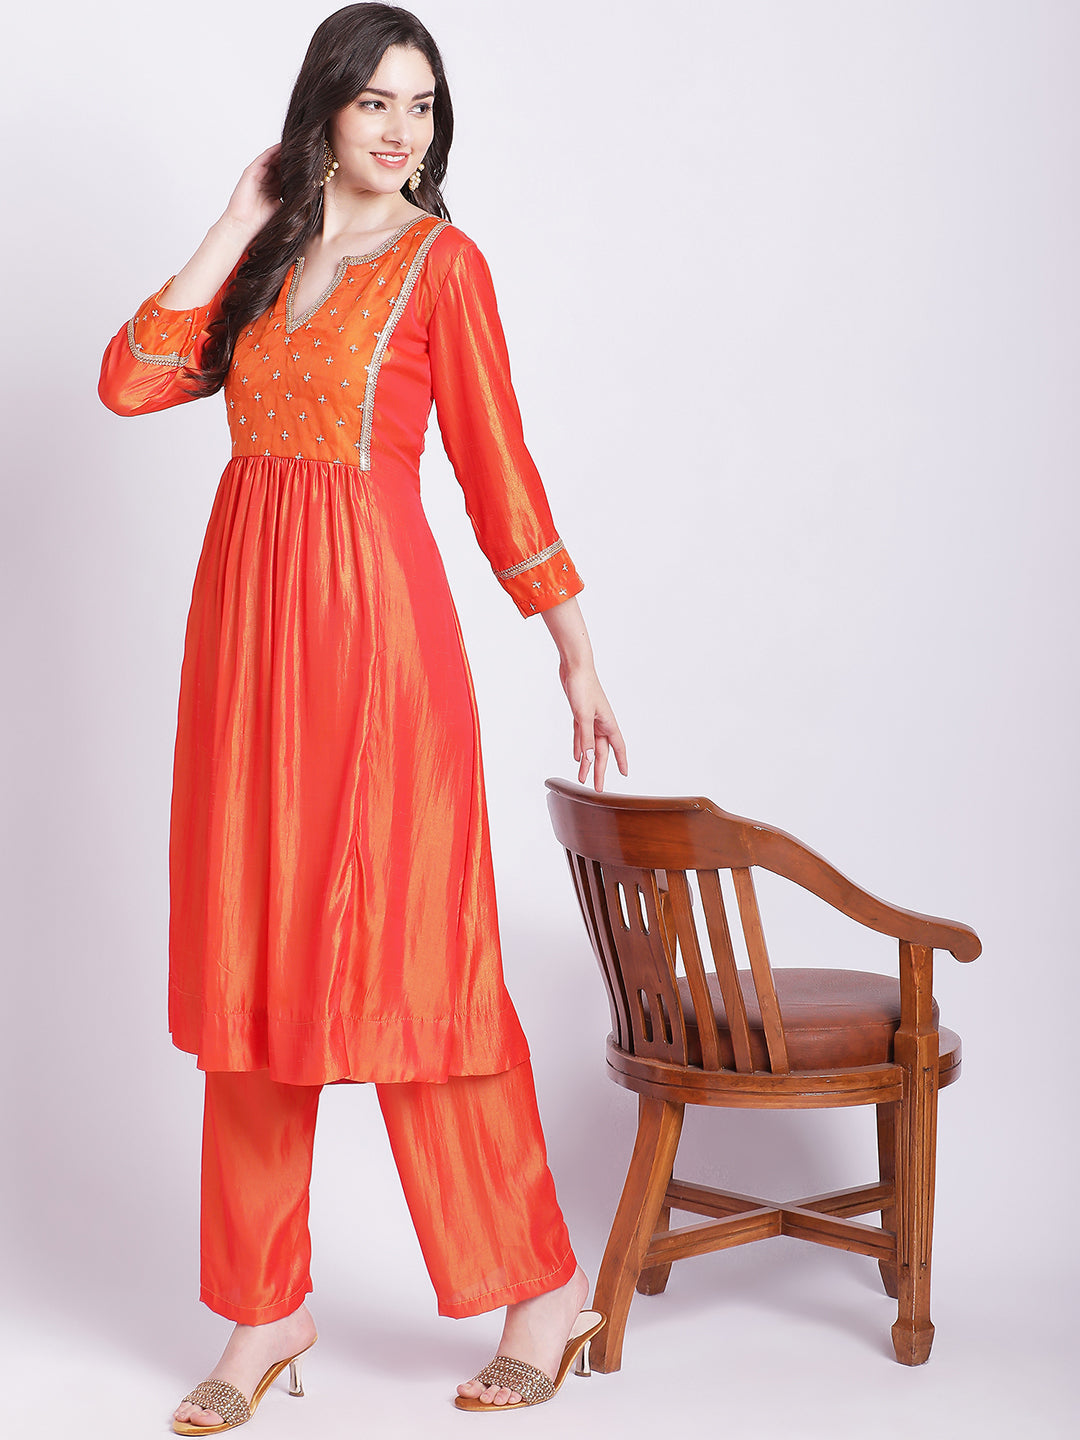 Buy Yellow And Orange Kurti In Pure Crepe With Contrast Pink Collar And  Piping Online - Kalki Fashion